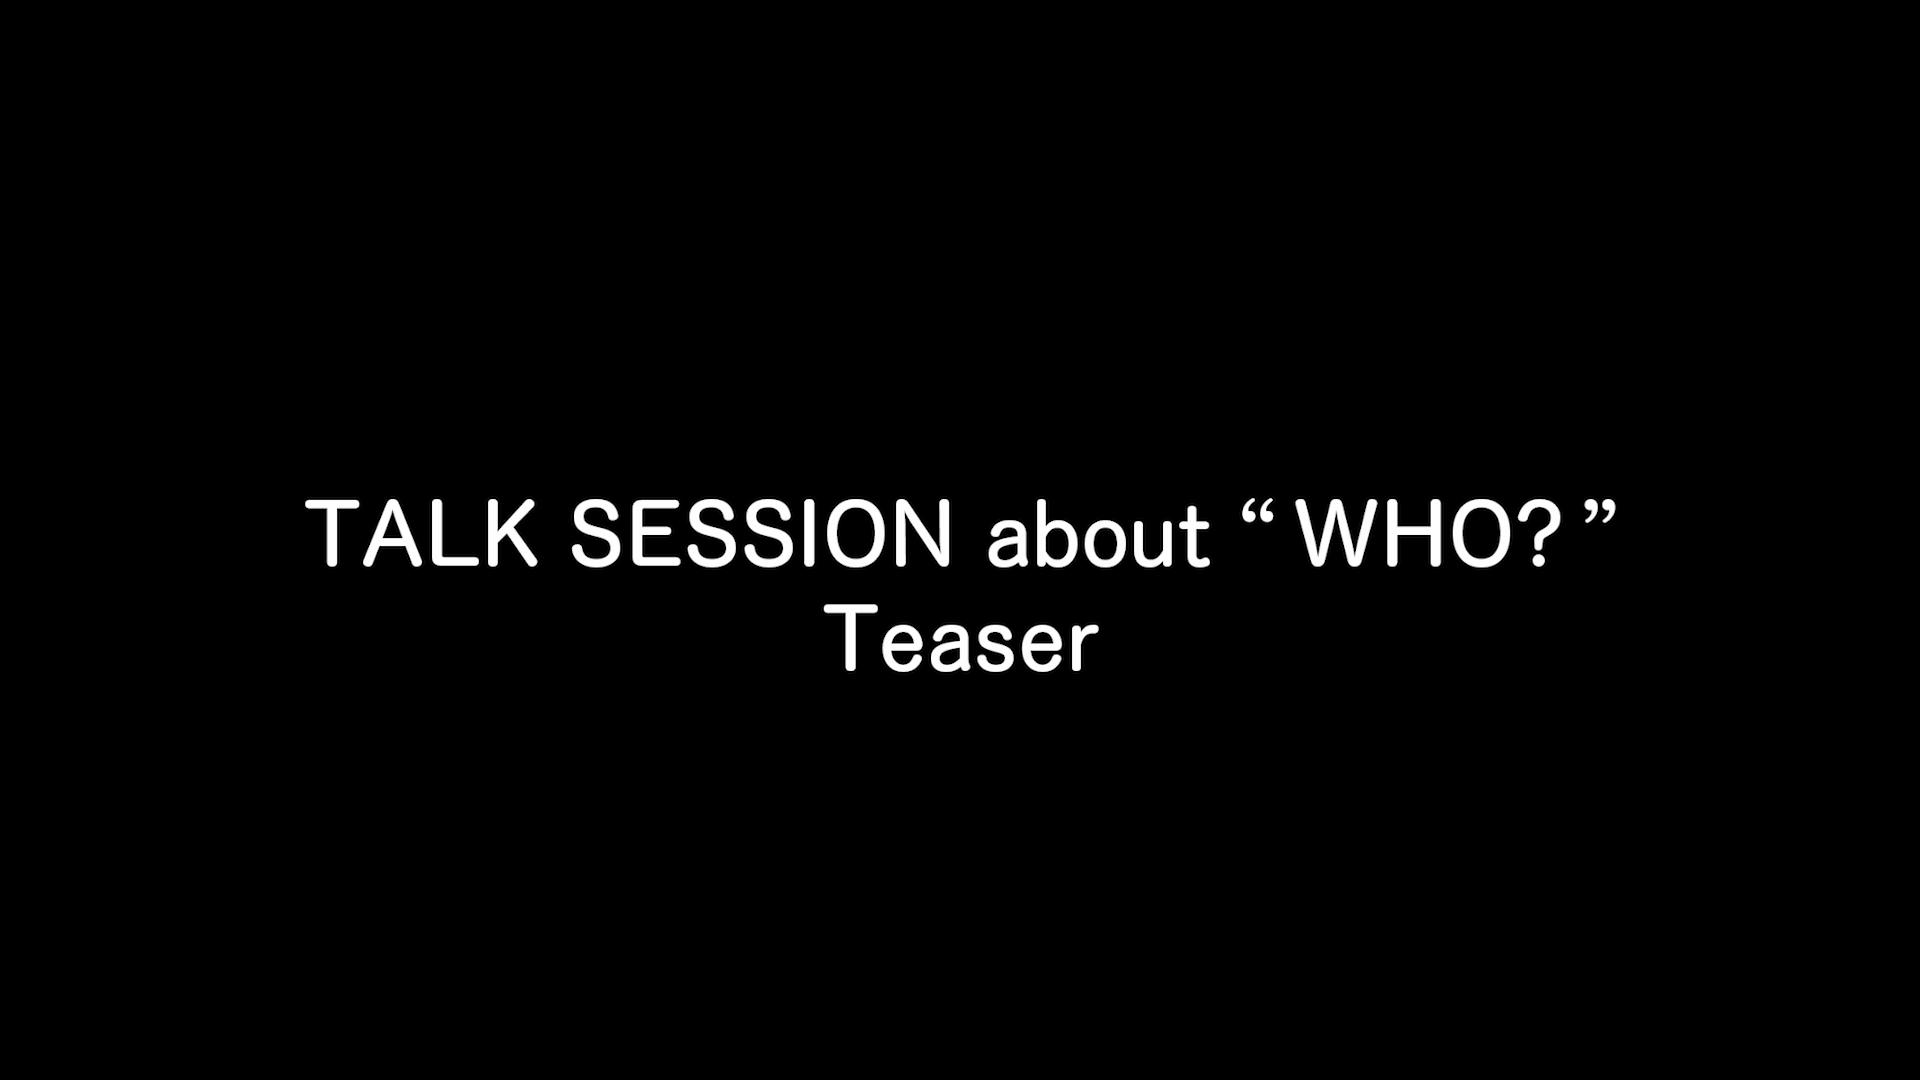 『TALK SESSION about “WHO?”』サムネイル